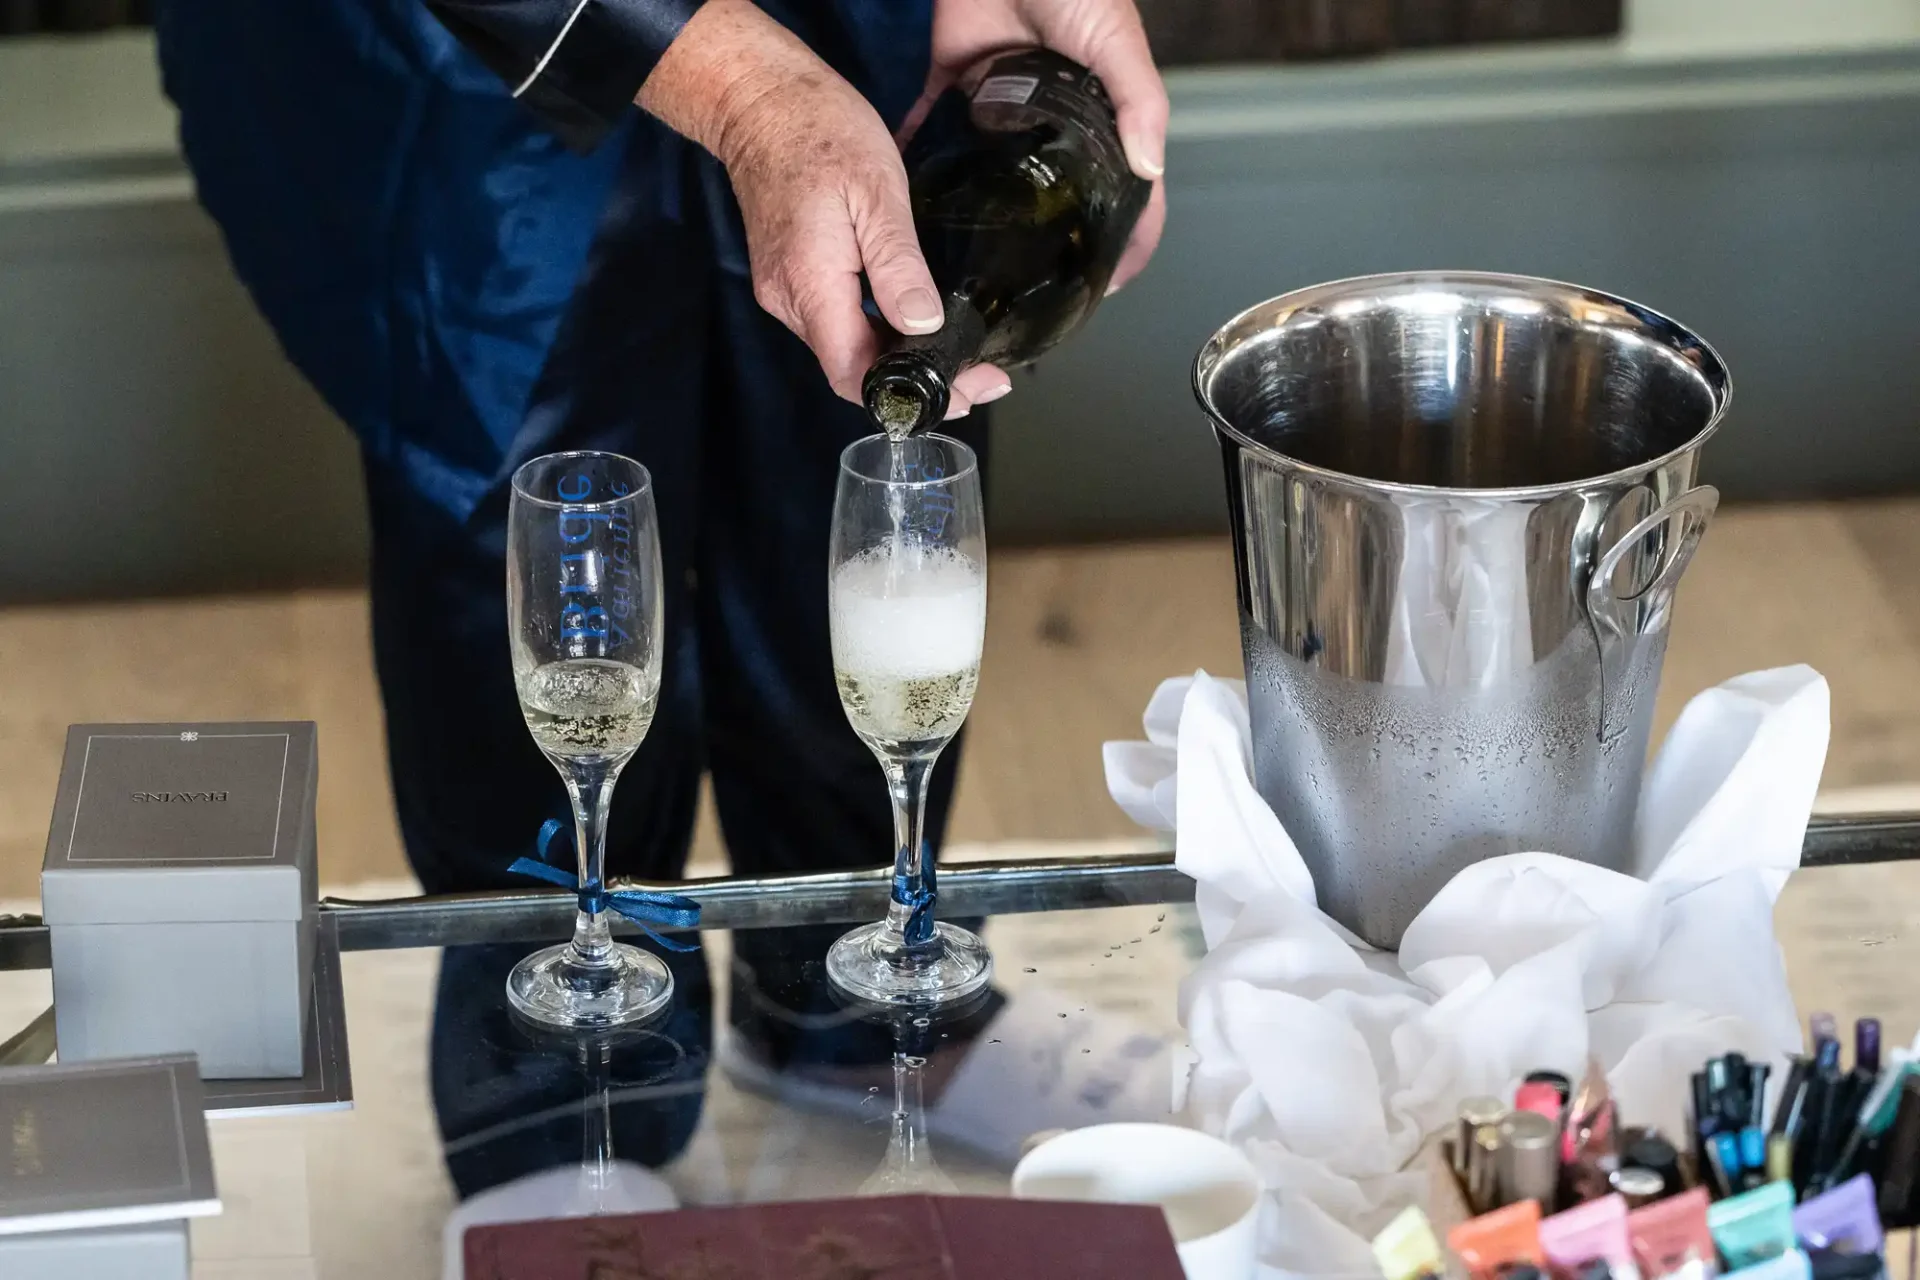 A person pours champagne into two flutes on a table with a silver ice bucket and various colored pens nearby.